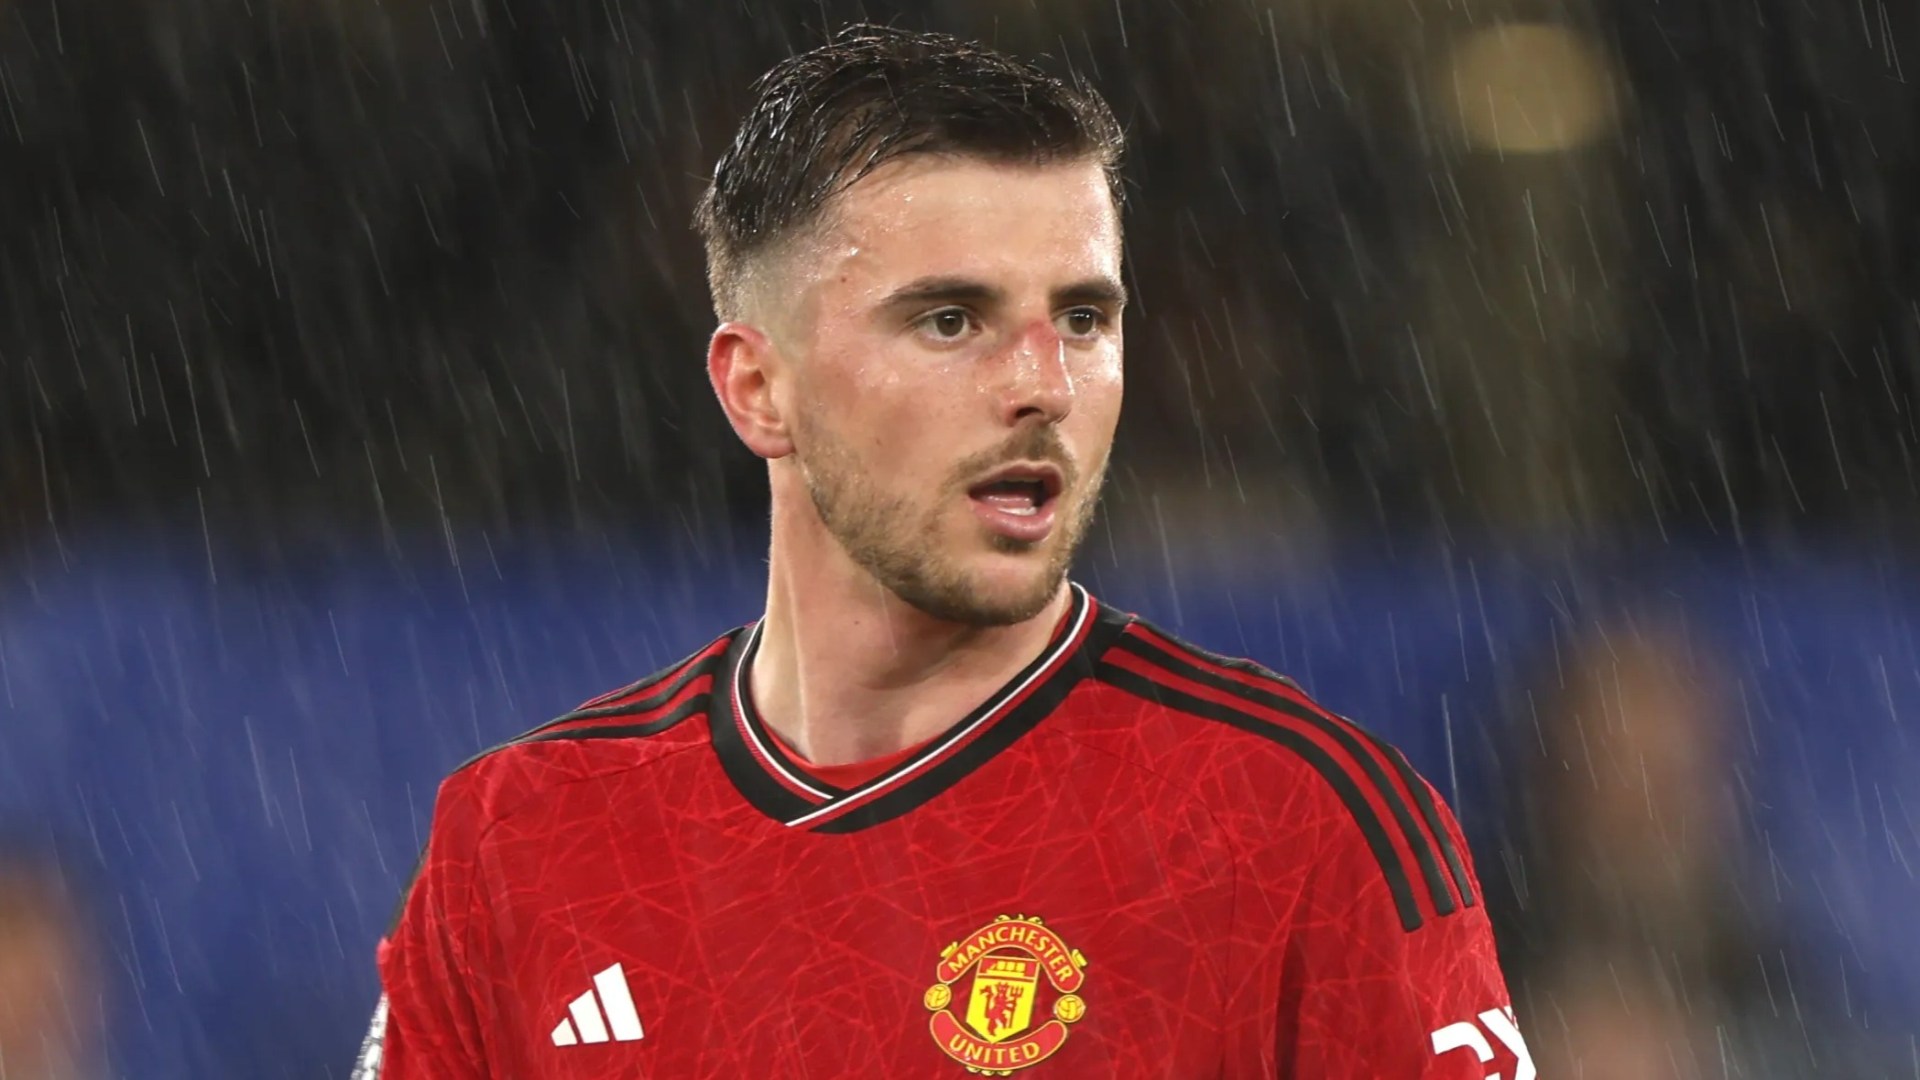 Man Utd star Mason Mount tipped for stunning career change after Alan Shearer describes him as ‘perfect’ [Video]